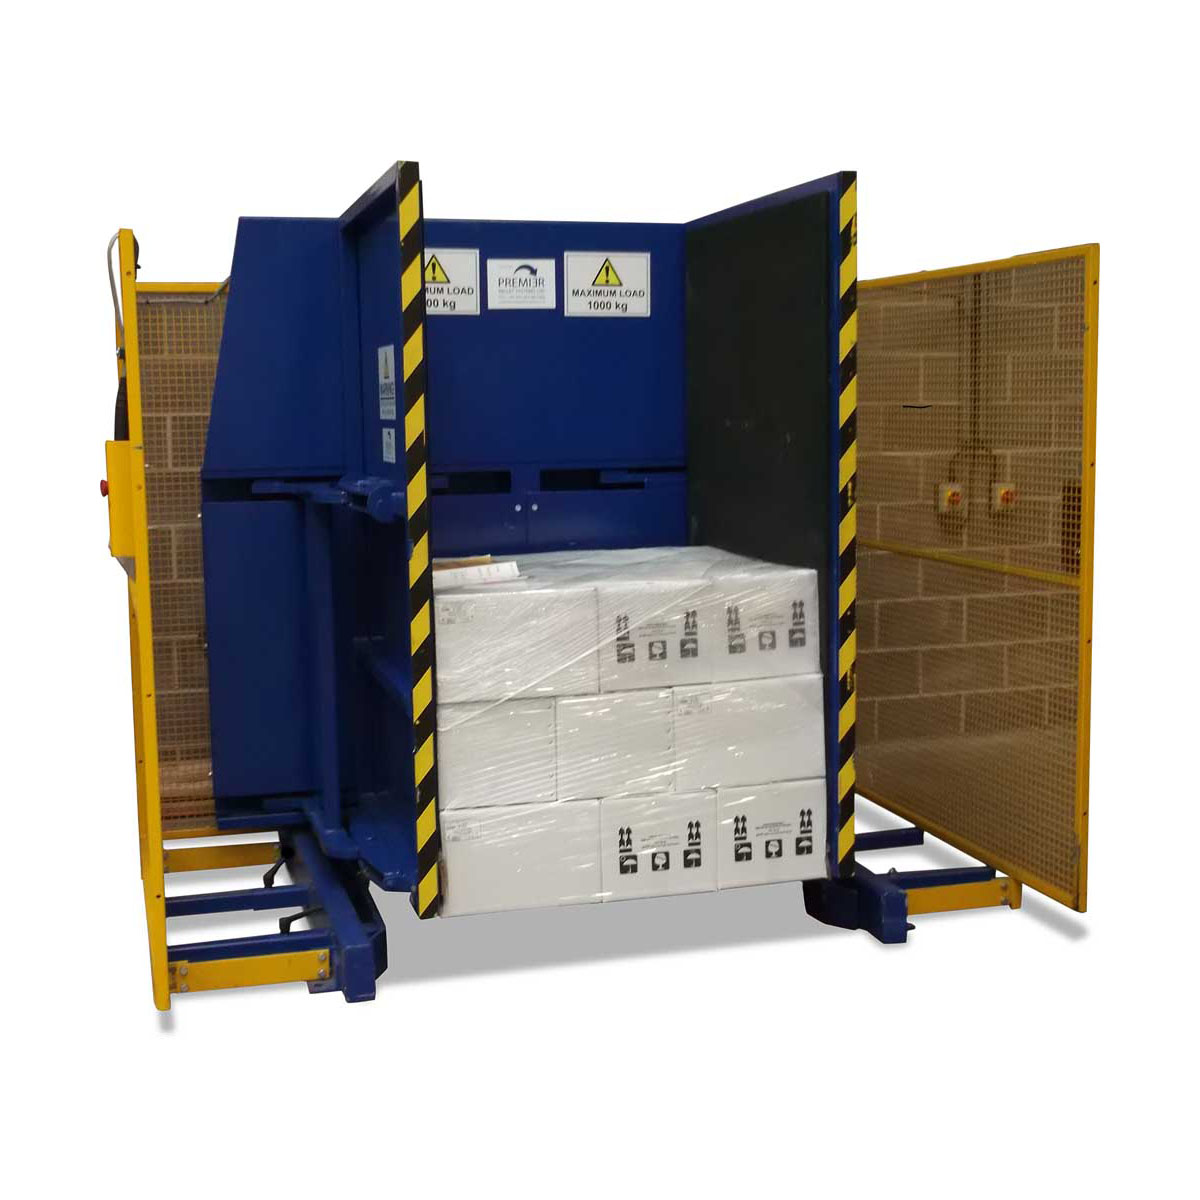 Buy Pallet Changer Non-Inversion in Pallet Inverter/Changer from Premier available at Astrolift NZ